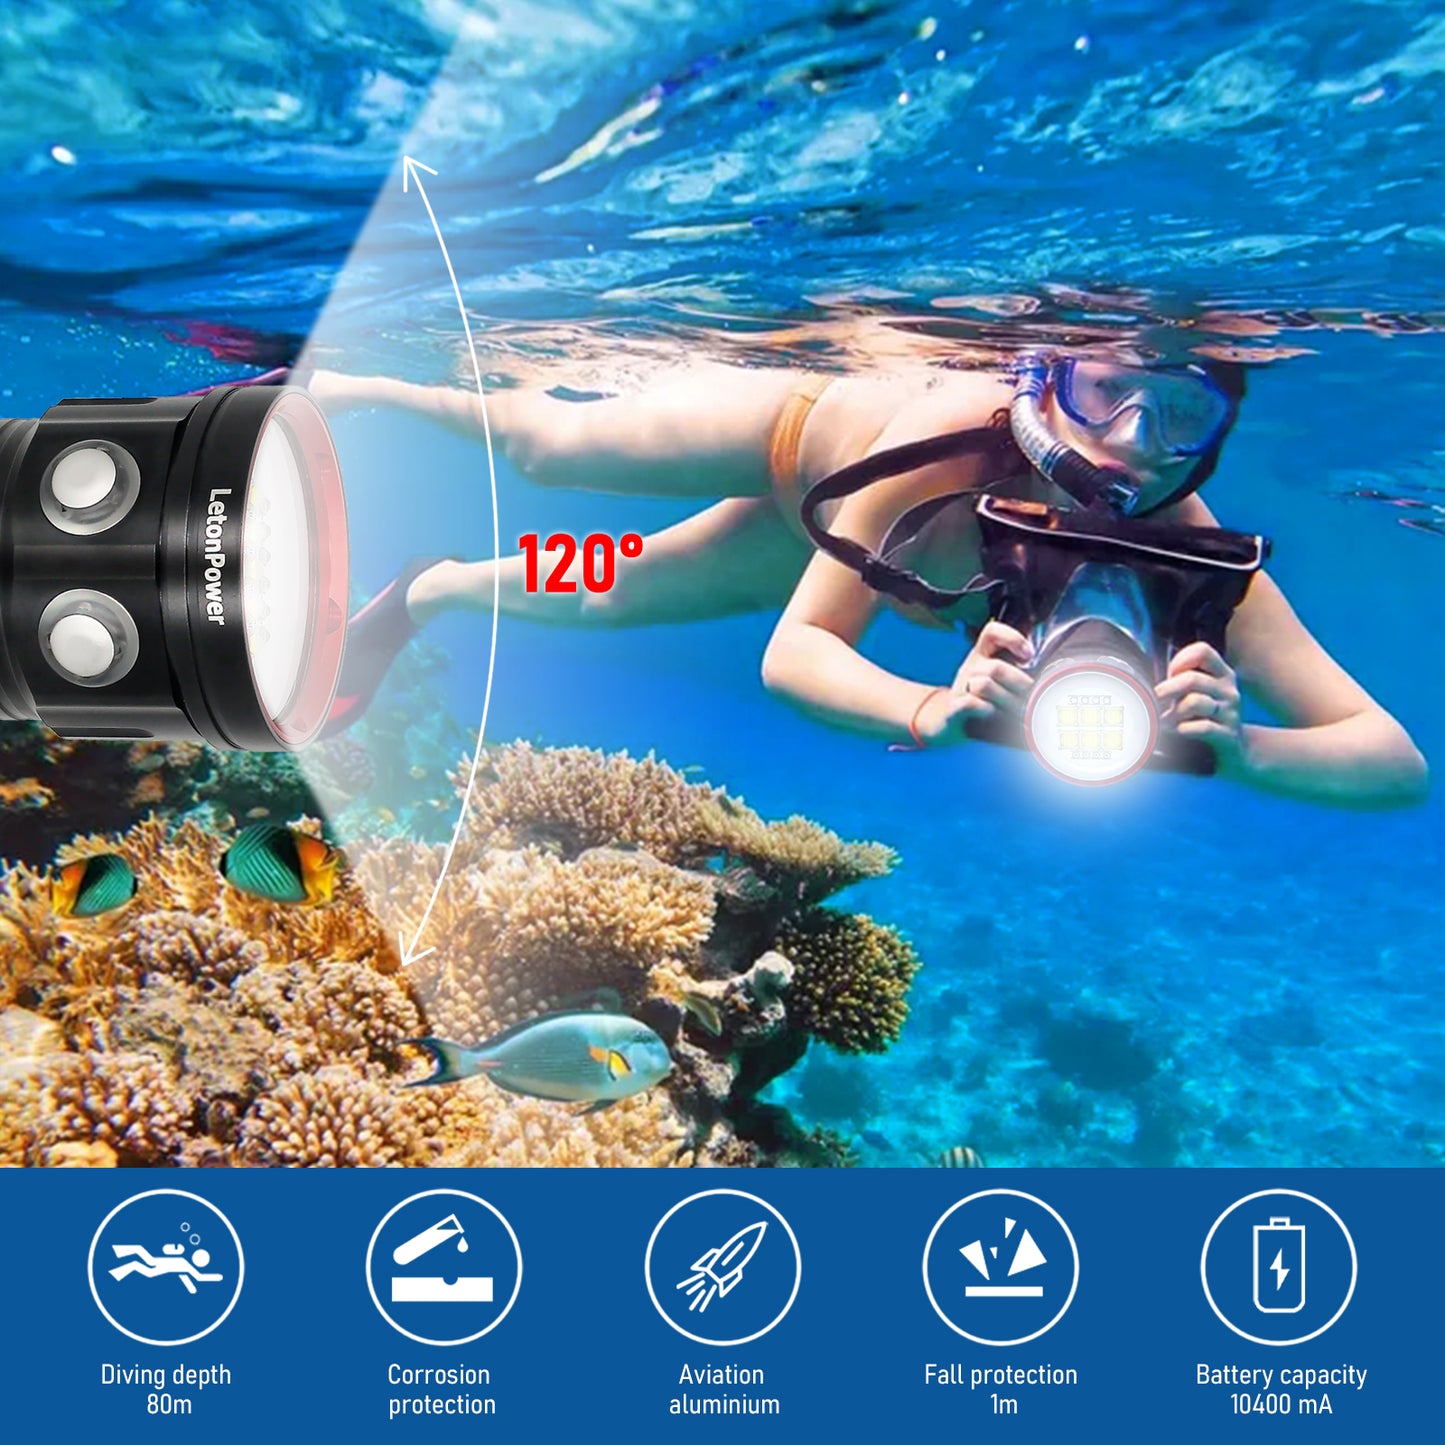 Diving Flashlight,LetonPower BB14 9000Lumens Dive Light,Super Bright Dive Light,80m Waterproof Flashlight,Scuba Dive Light,Dive Lights for Underwater Video Shooting and Photography